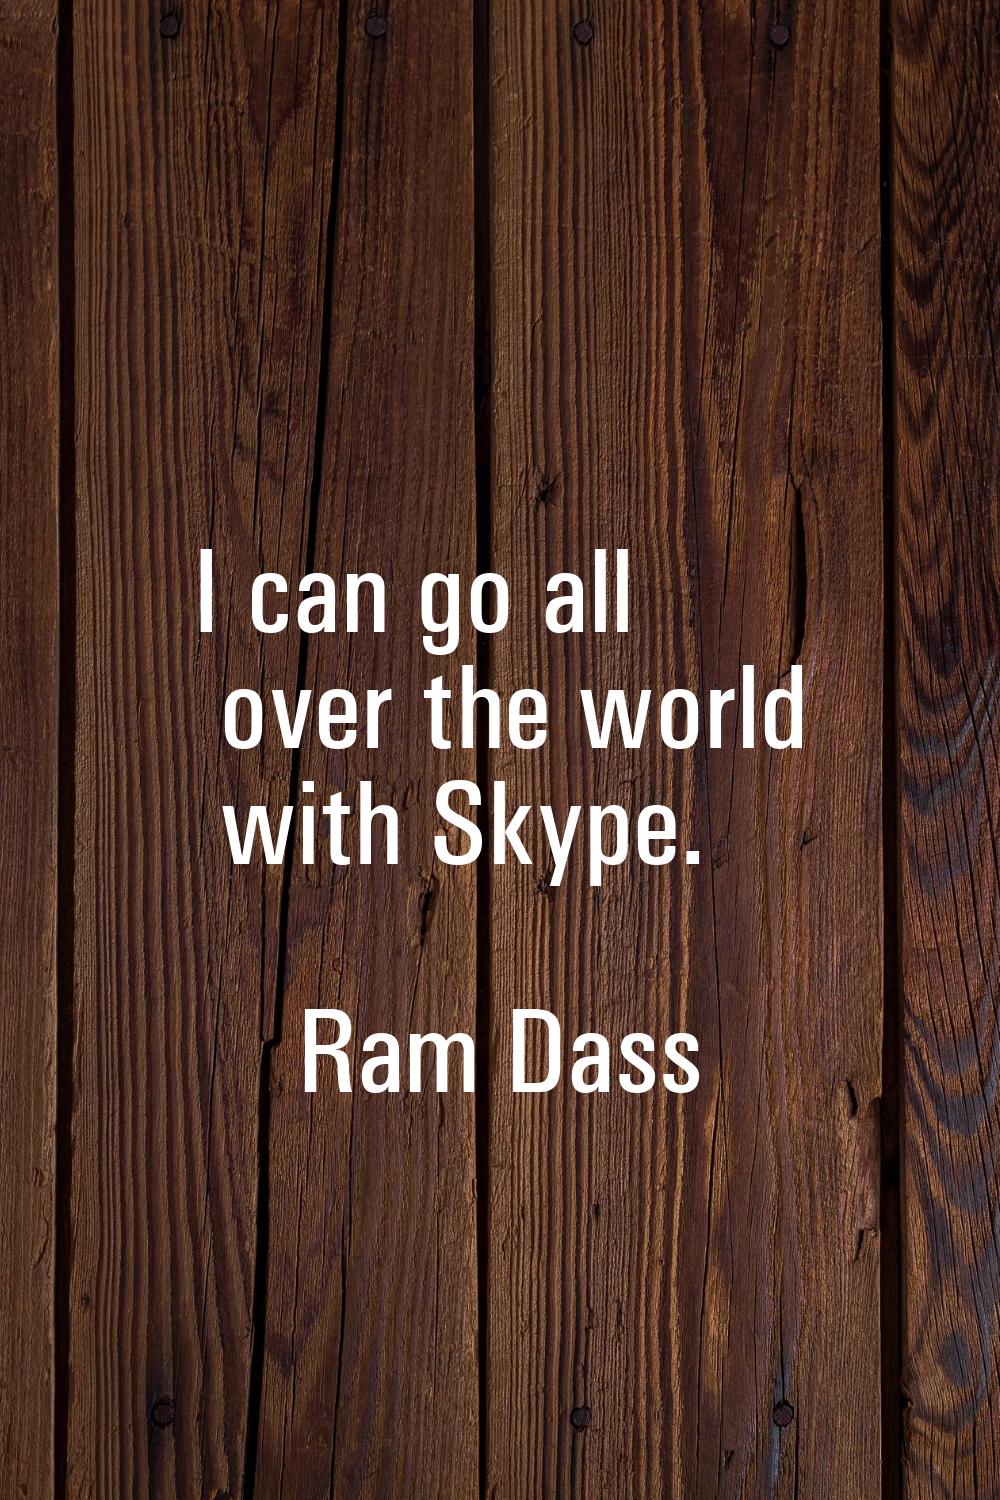 I can go all over the world with Skype.